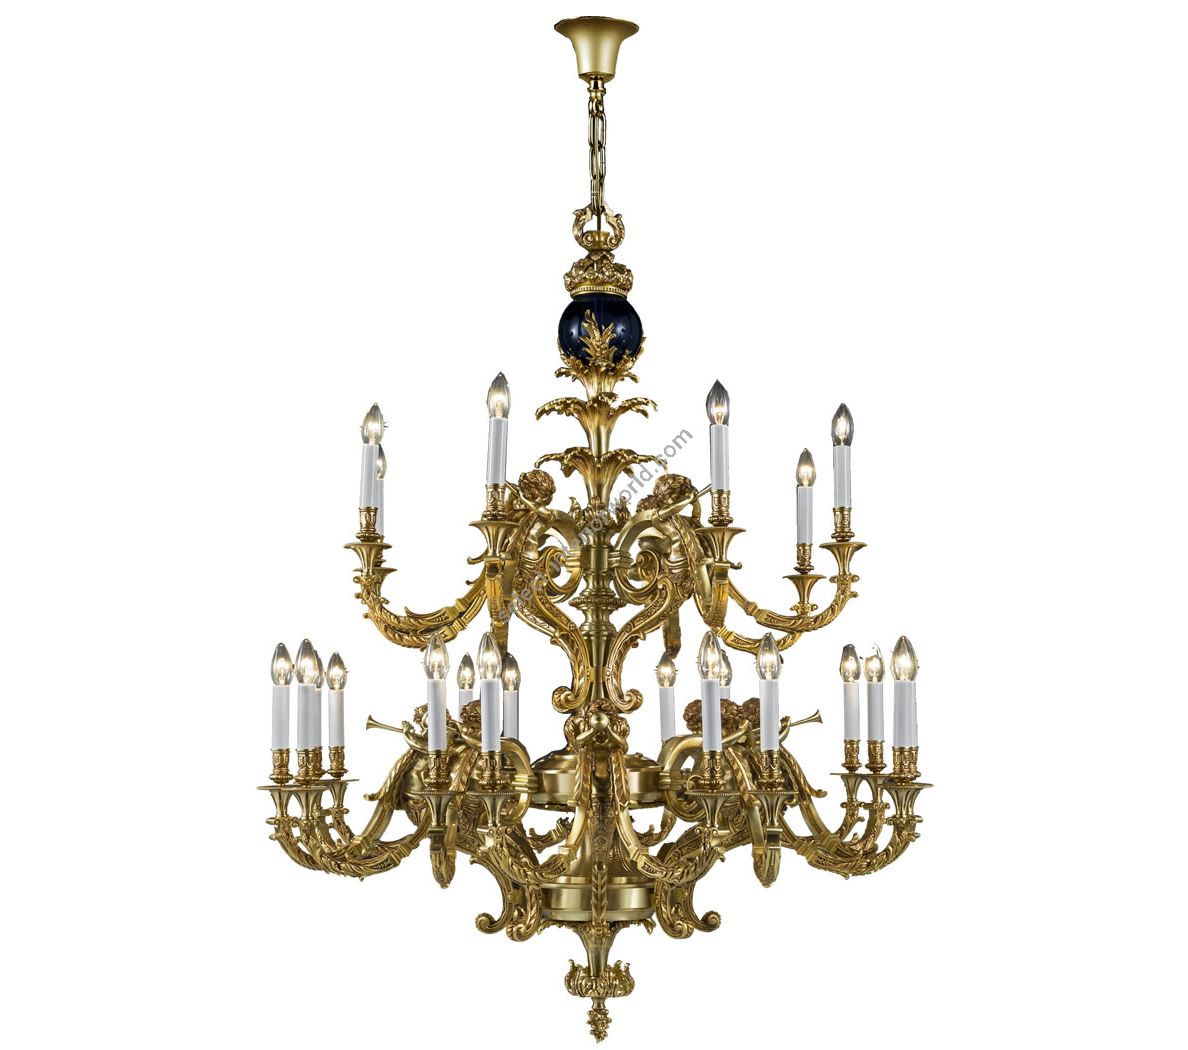 Mariner / Large French Chandelier Louis XV Style Baroque / 20190